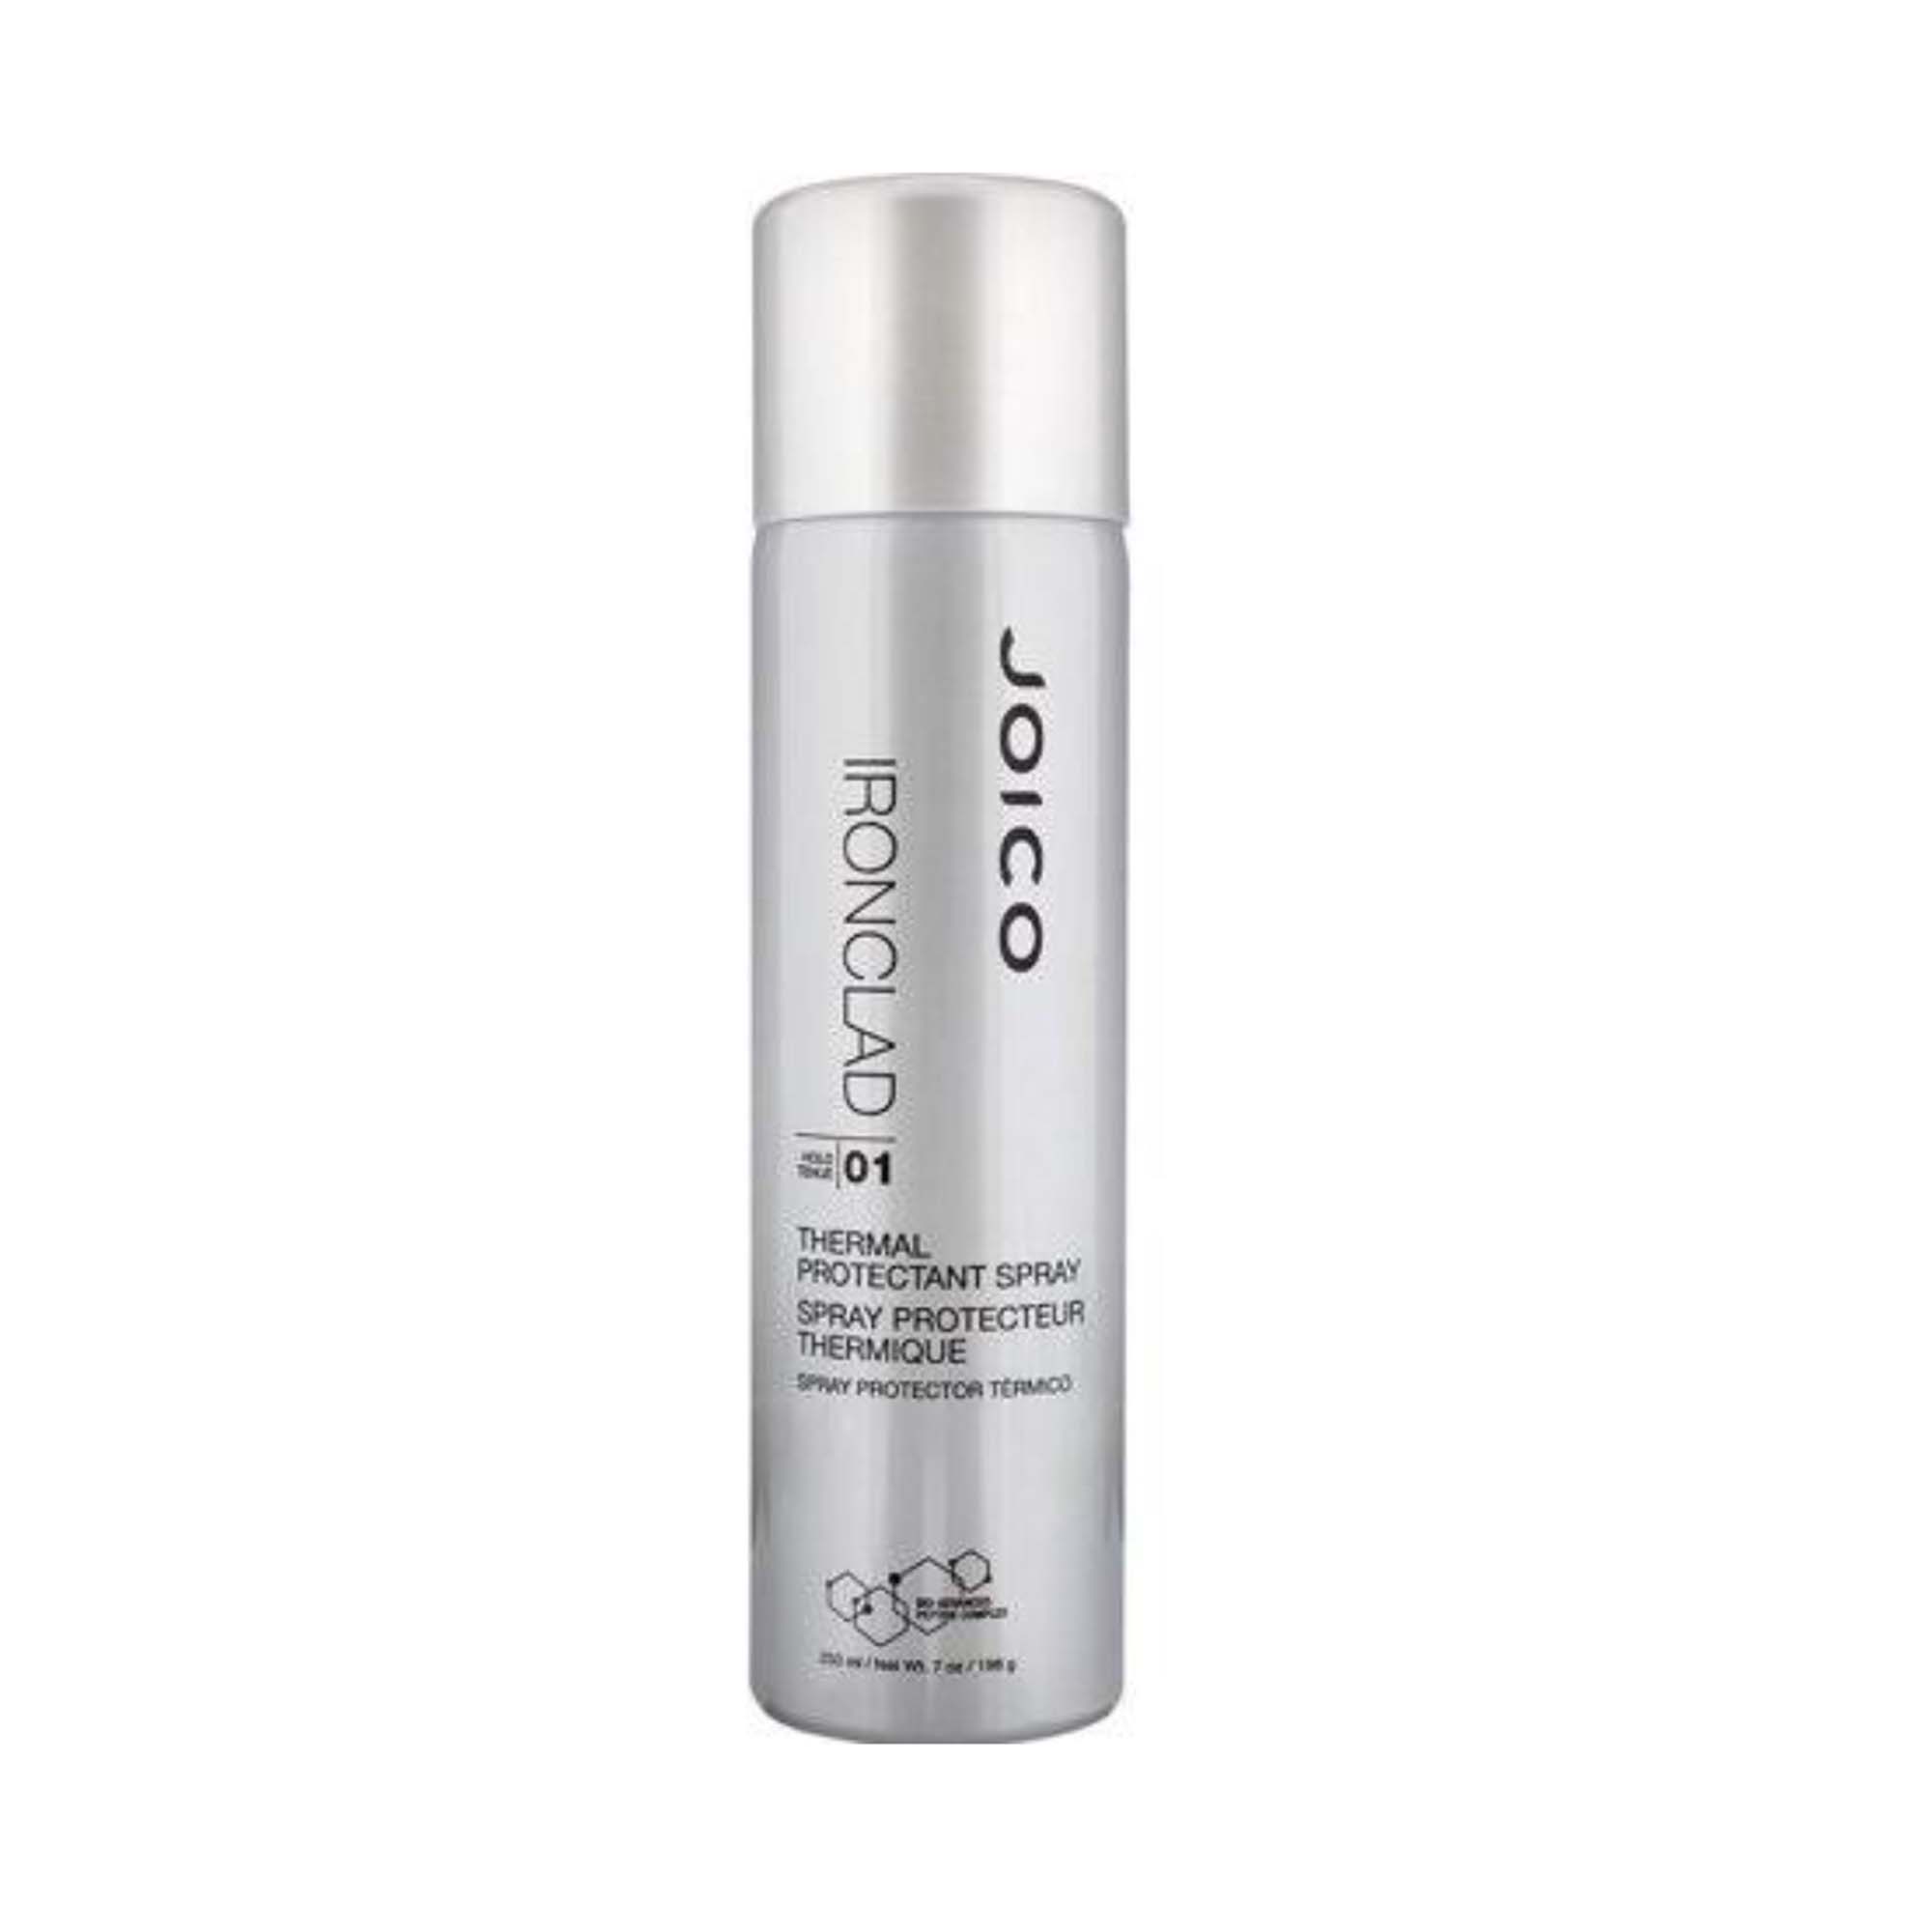 Joico IRONCLAD Thermal Protectant Spray Hold 01  7oz